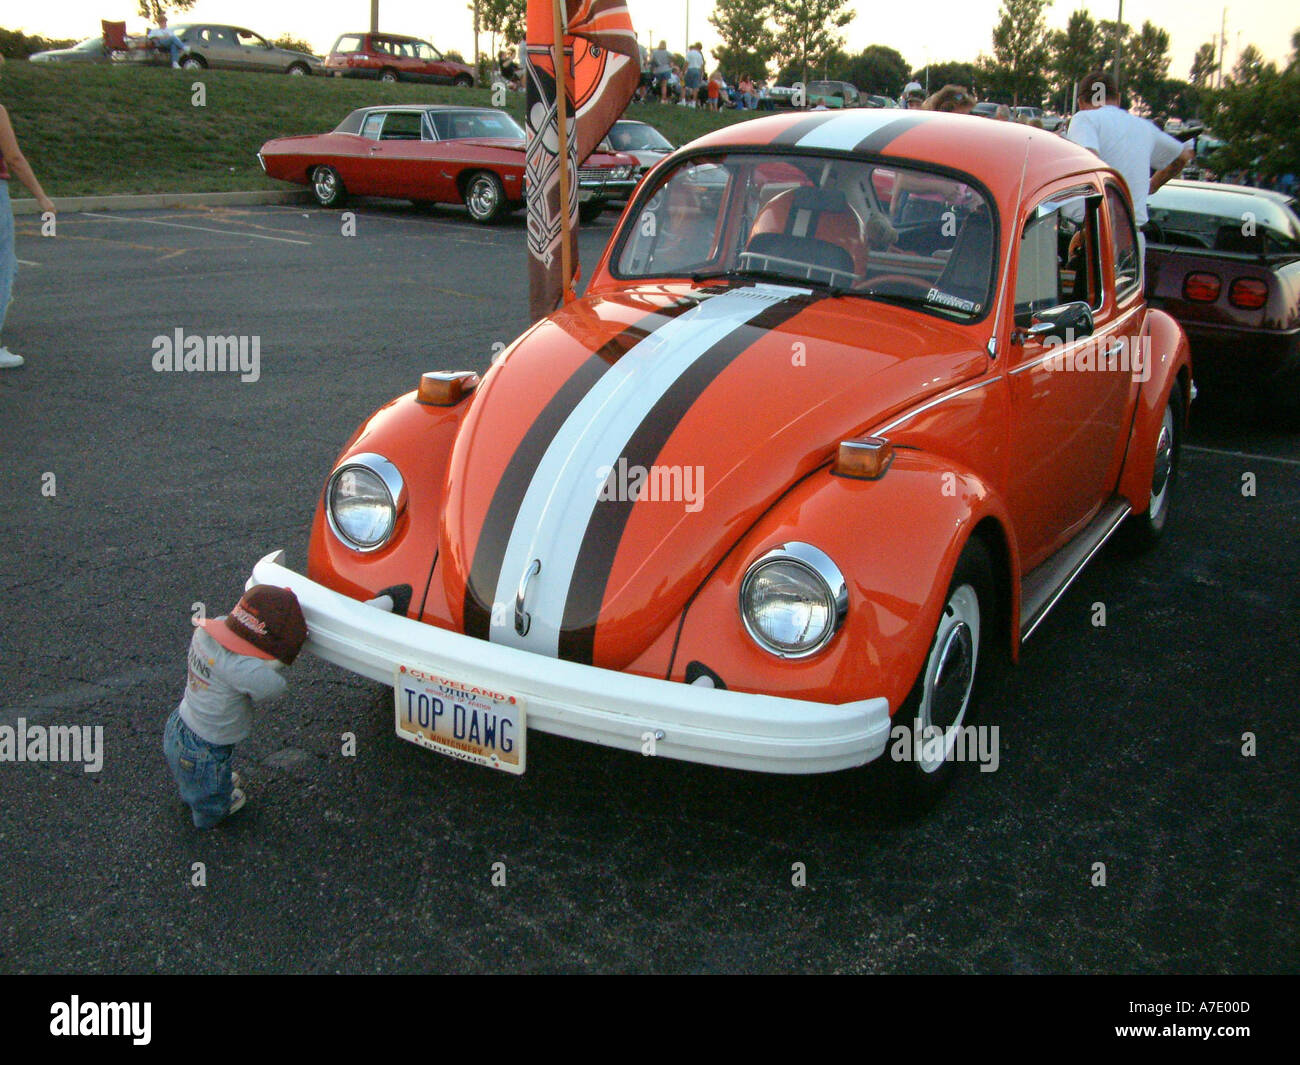 1974 Volkswagon Beetle Cleveland Browns football team colors and motif  TOPDAWG Stock Photo - Alamy